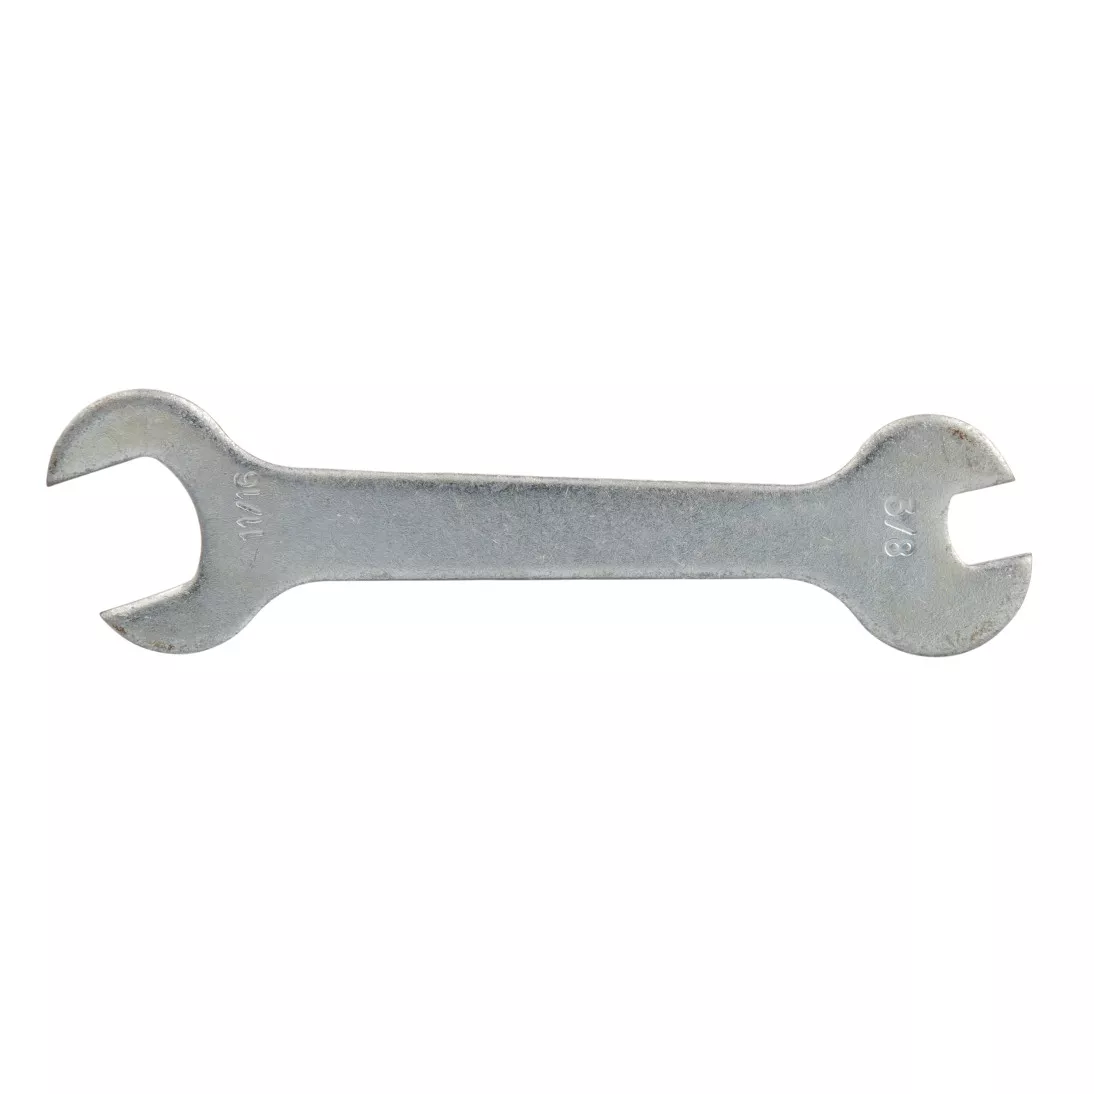 3M™ Wrench 3/8 x 11/16 87125